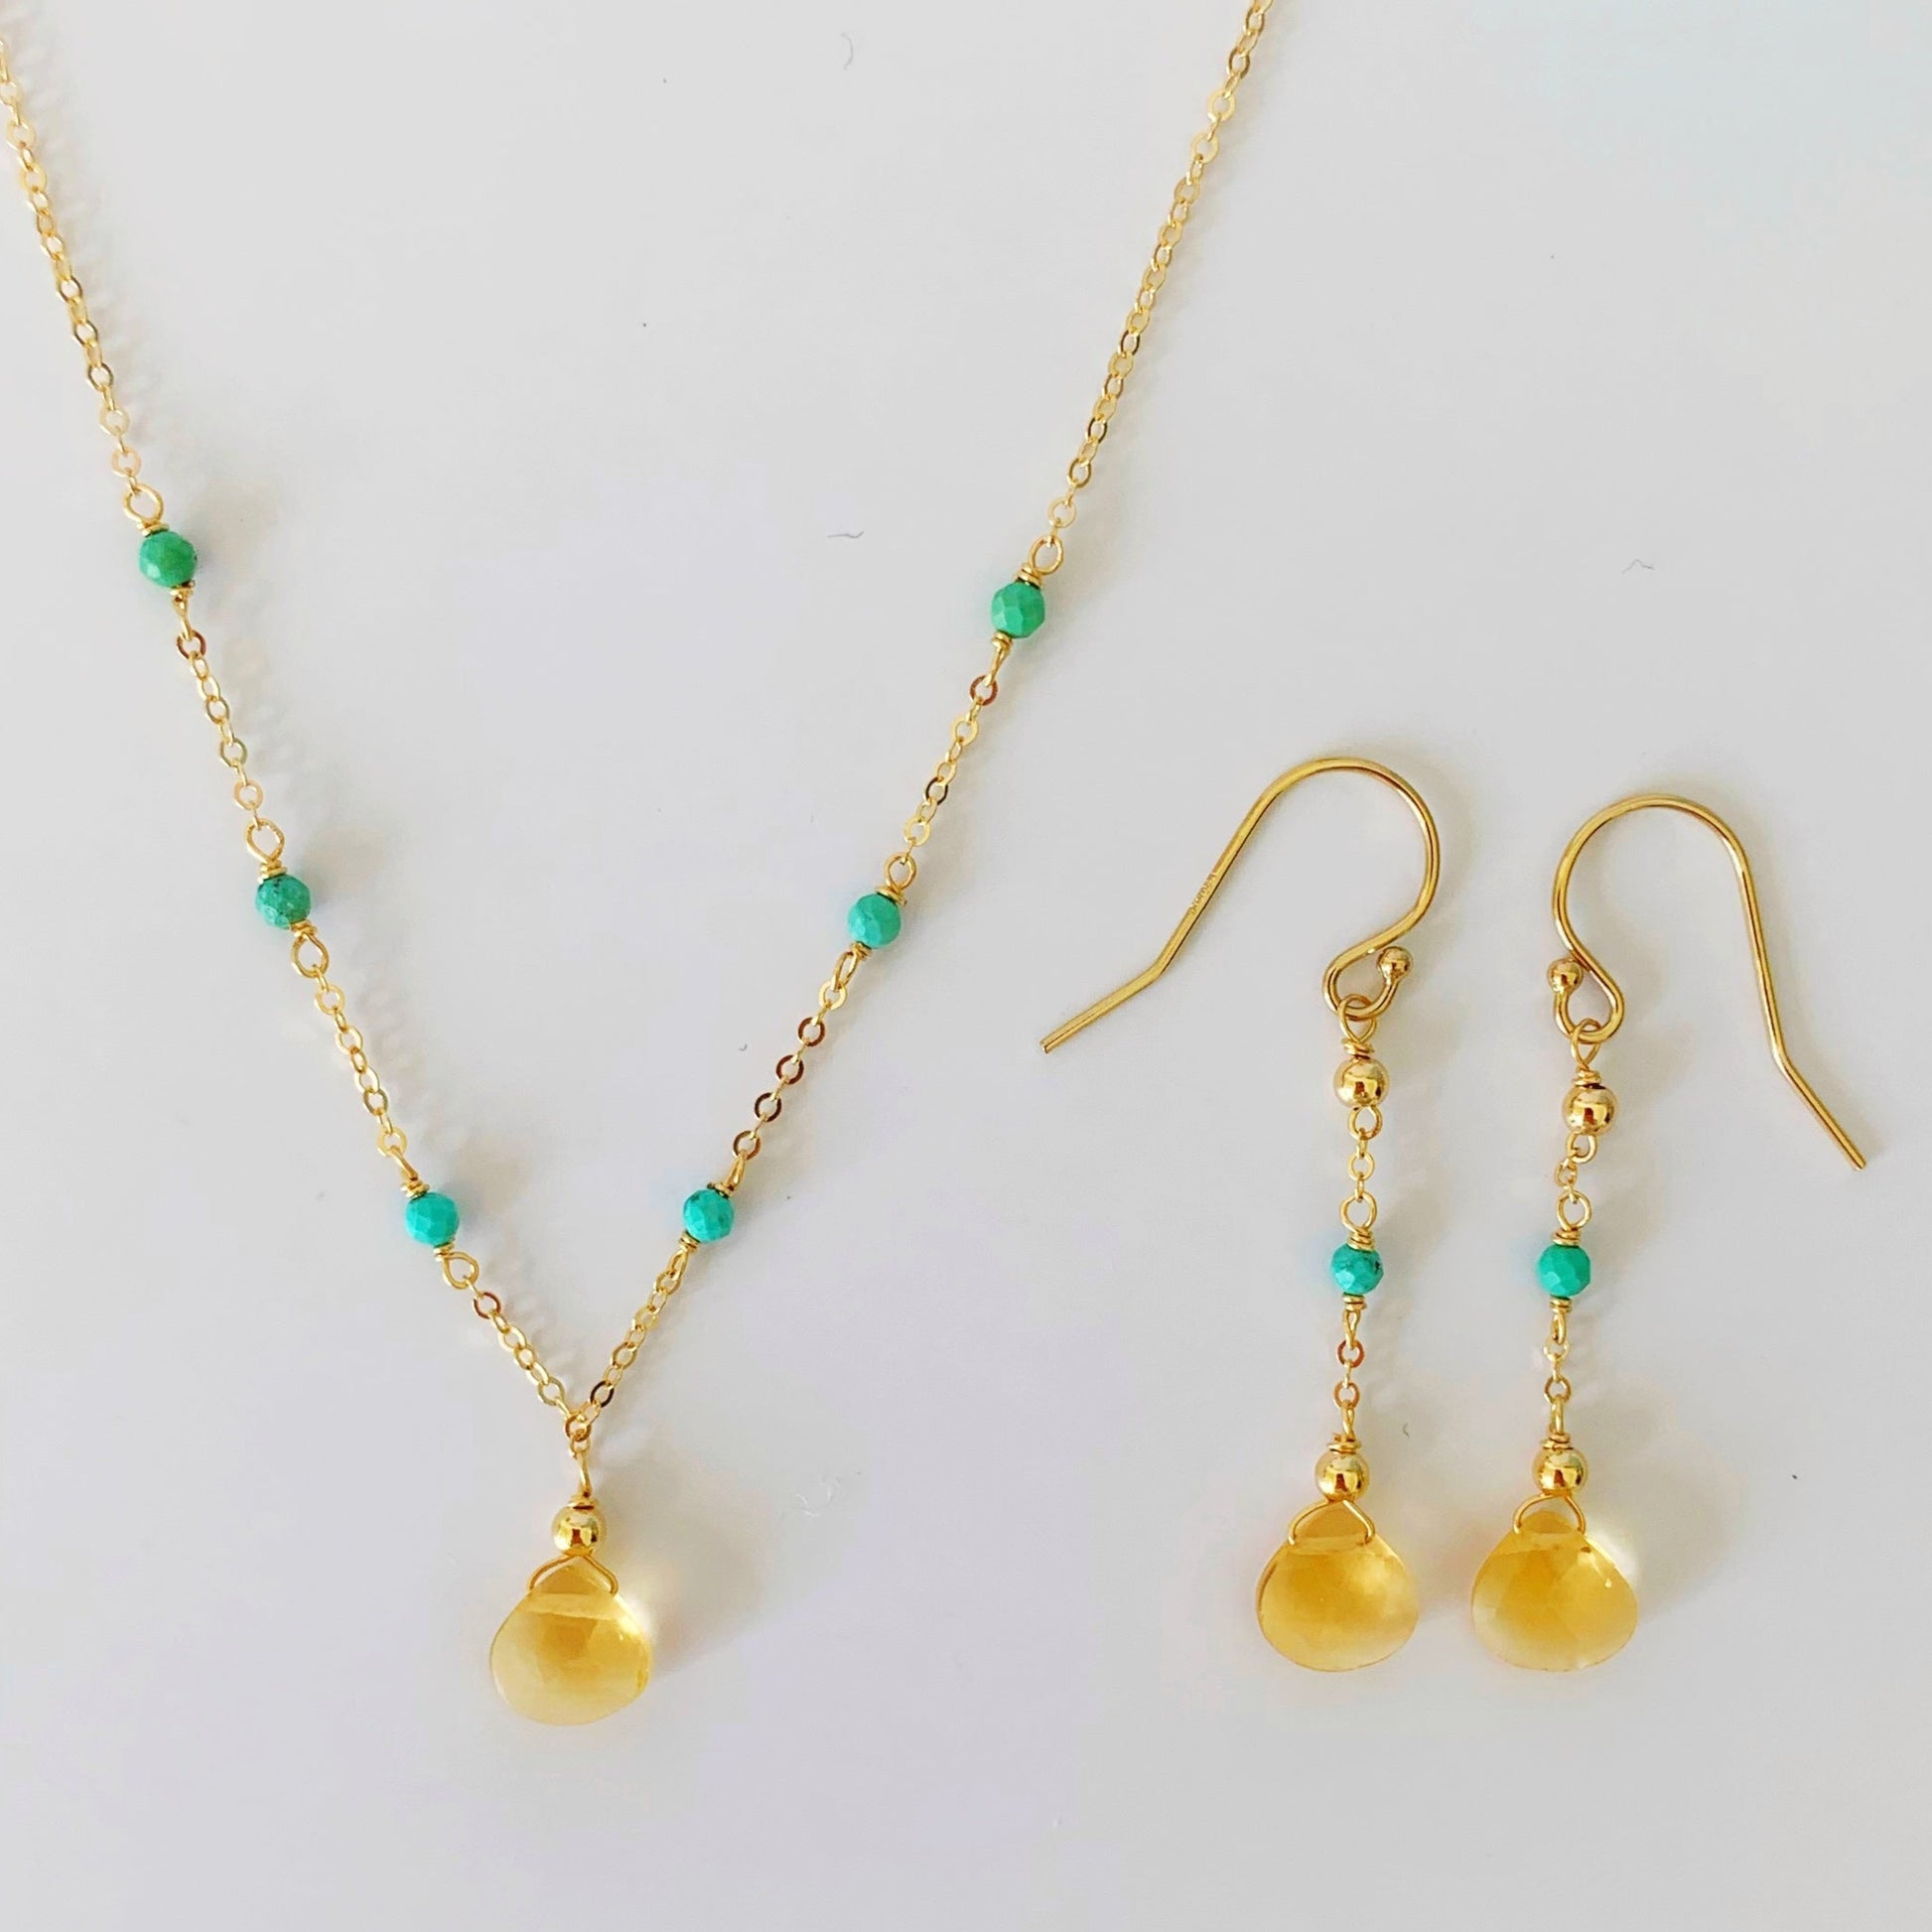 an image of the ray of sunshine earrings and necklace together over a white background